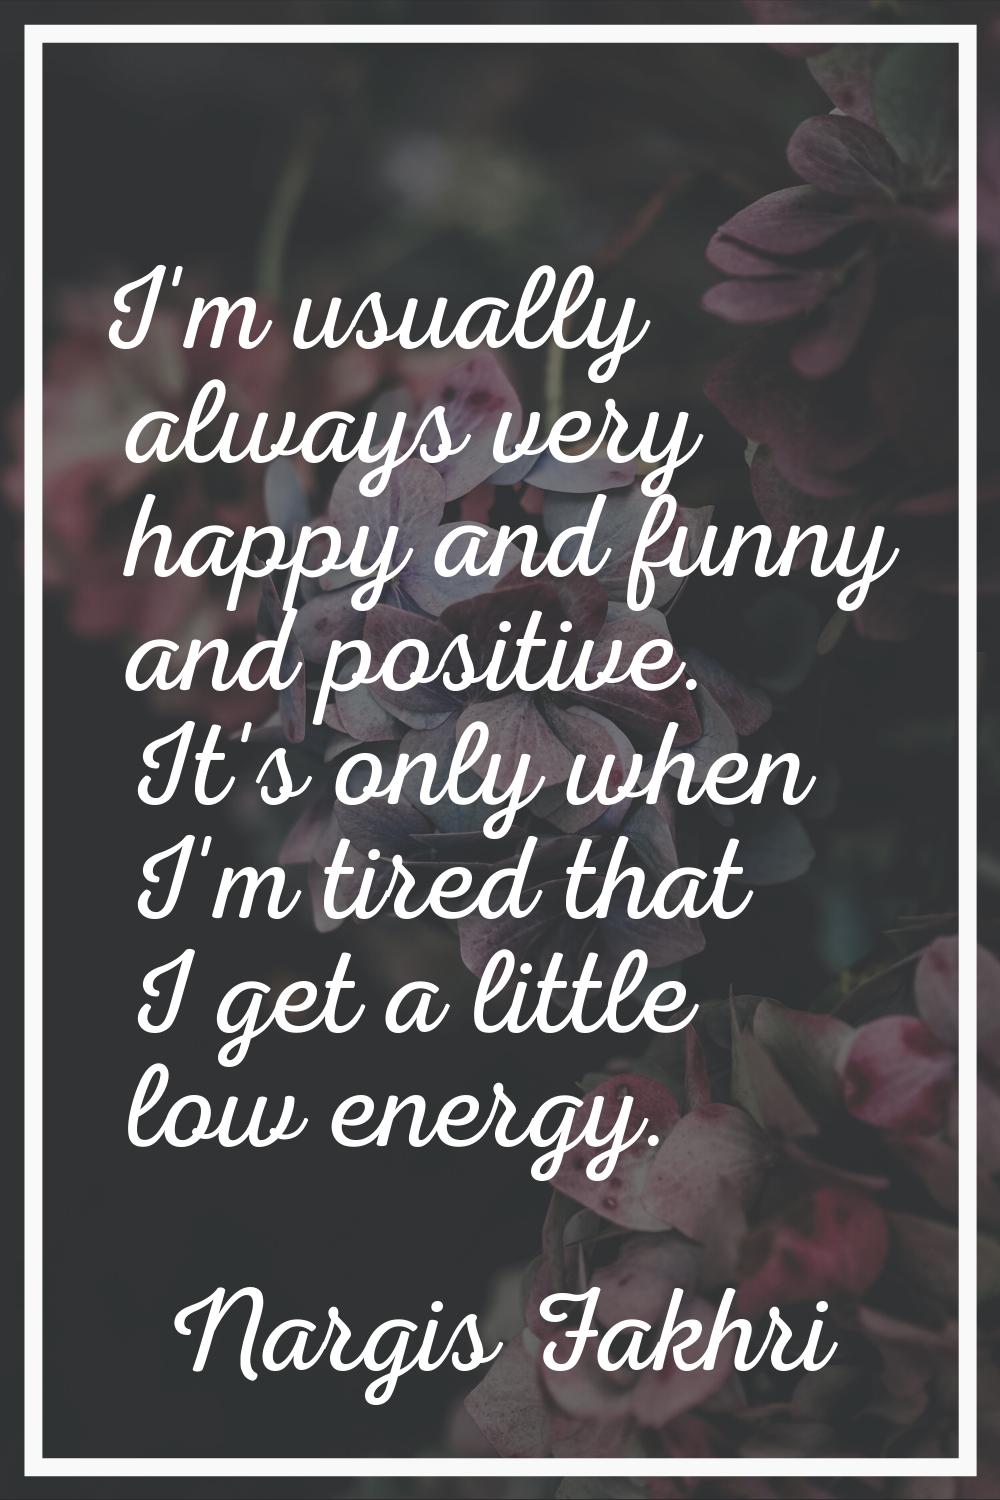 I'm usually always very happy and funny and positive. It's only when I'm tired that I get a little 